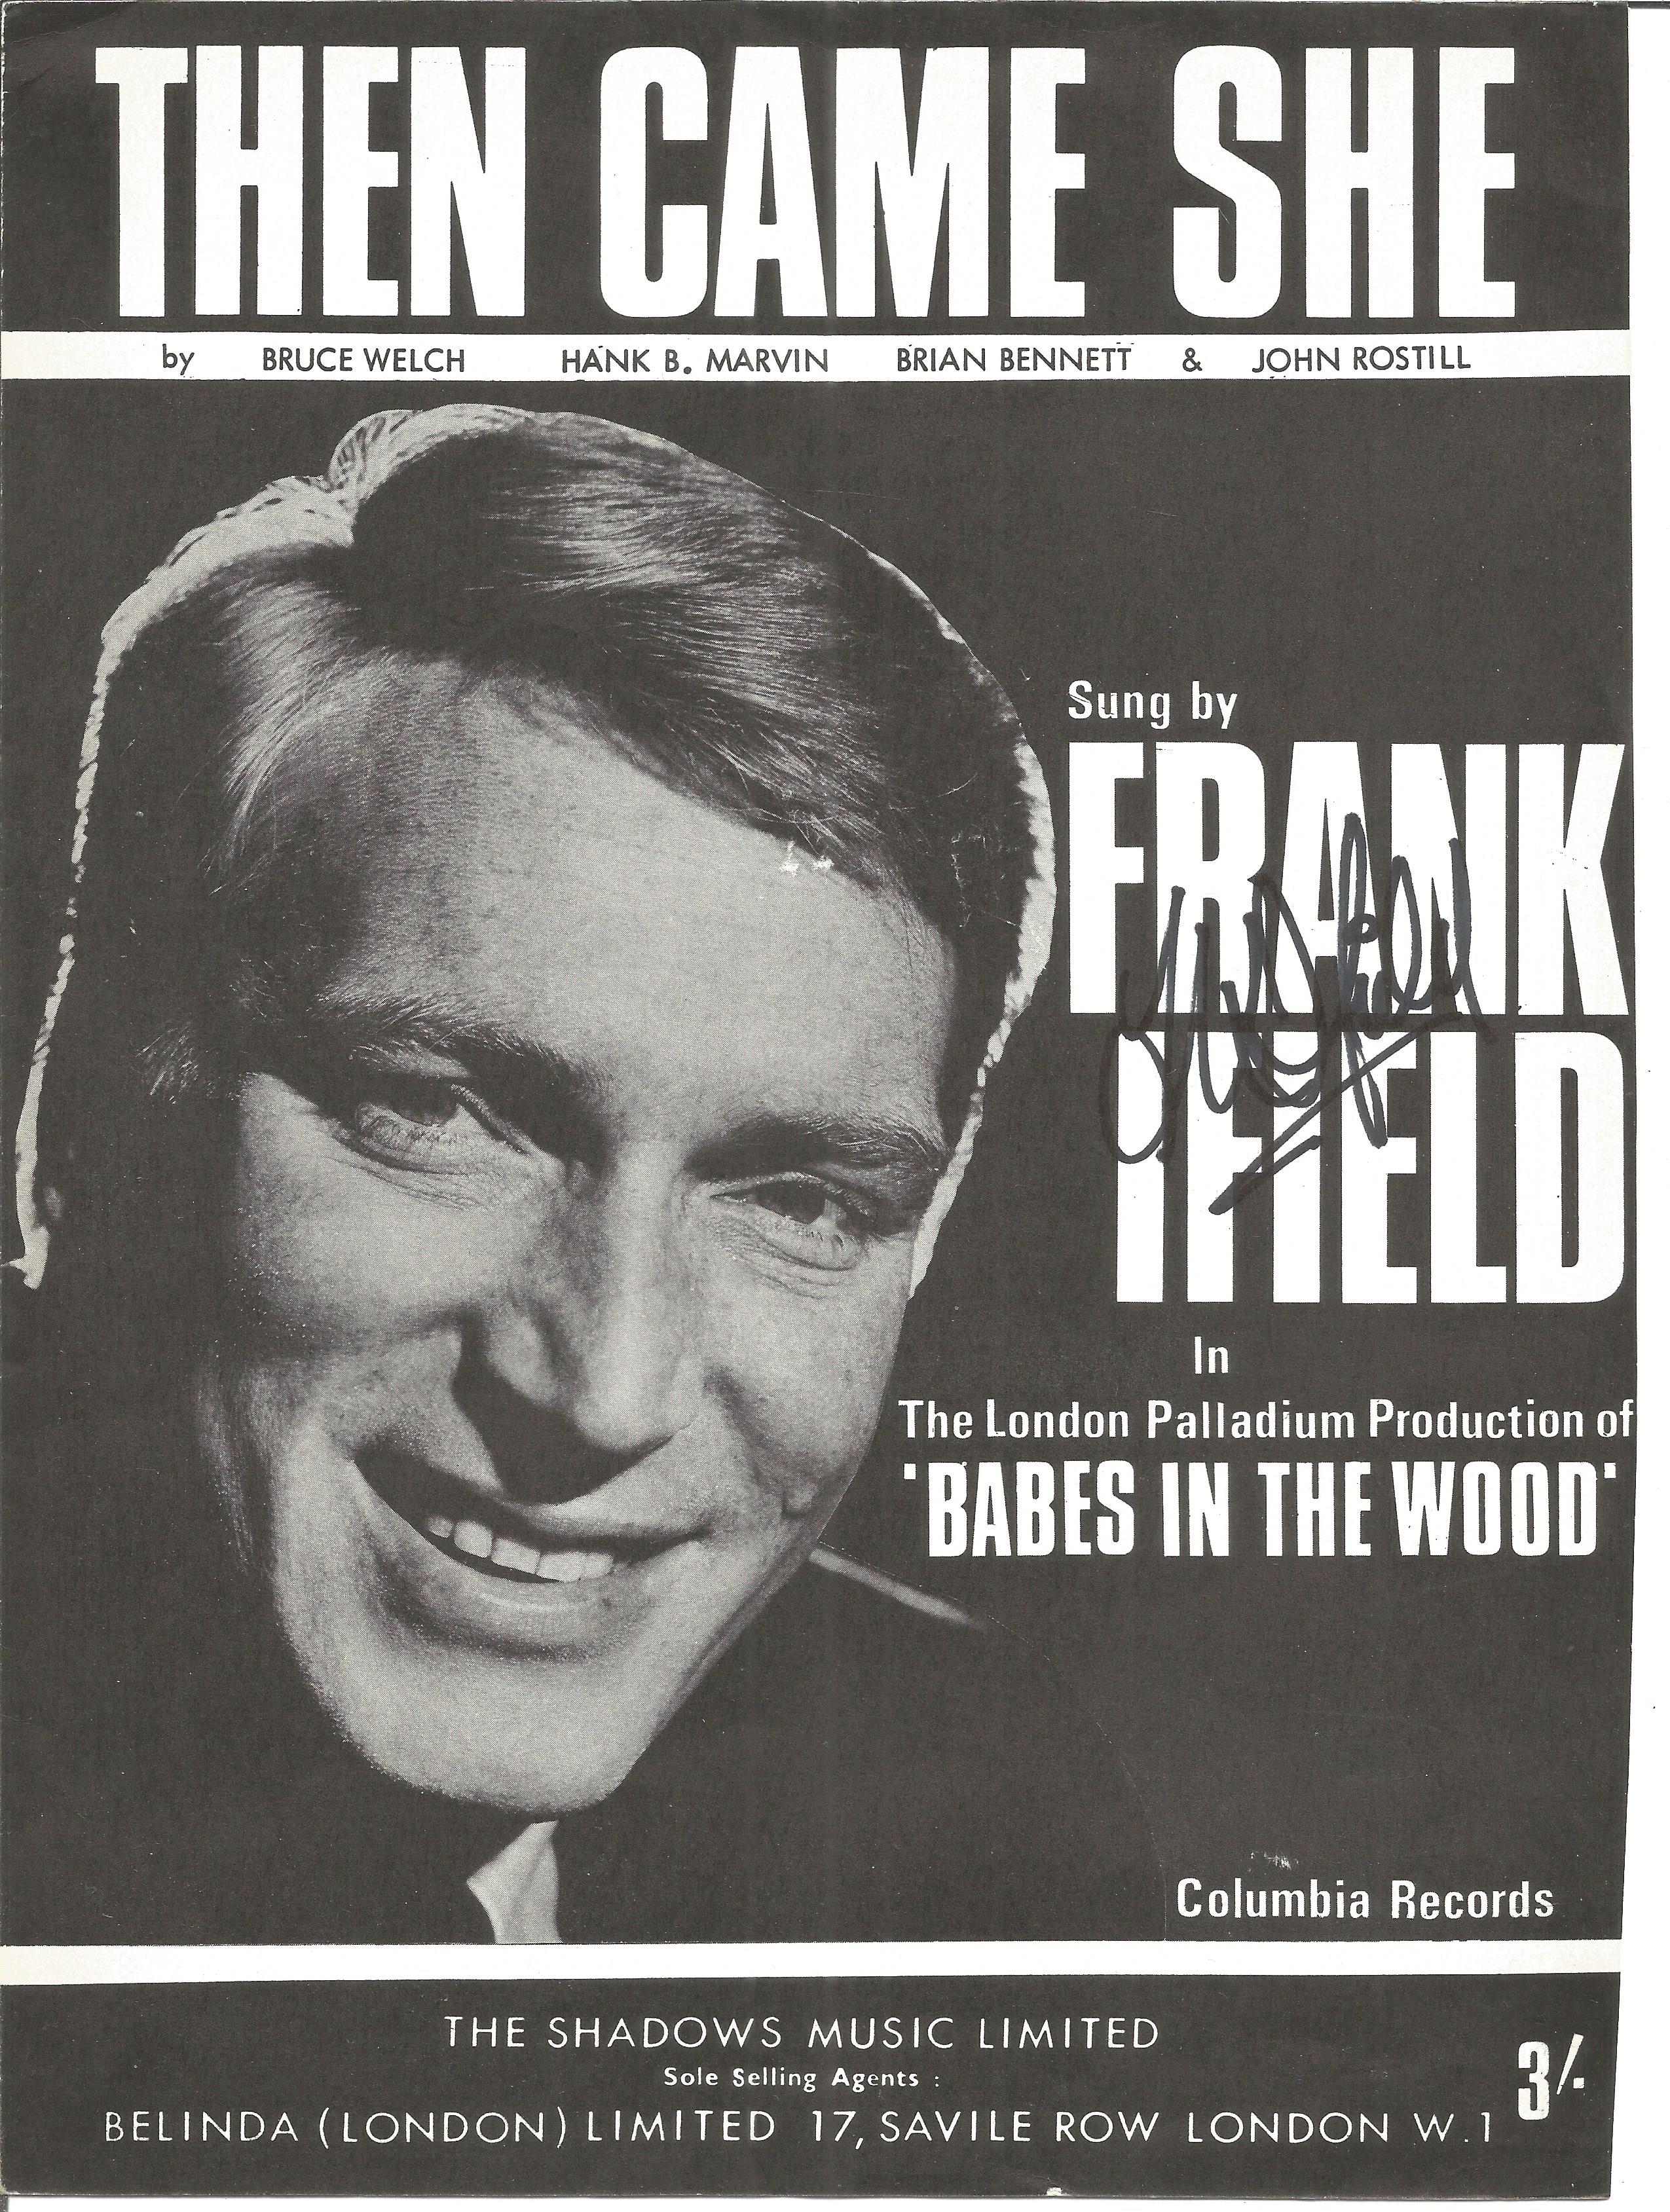 FRANK IFIELD signed vintage 1965 Then Came She Sheet Music. Good condition. All autographs come with